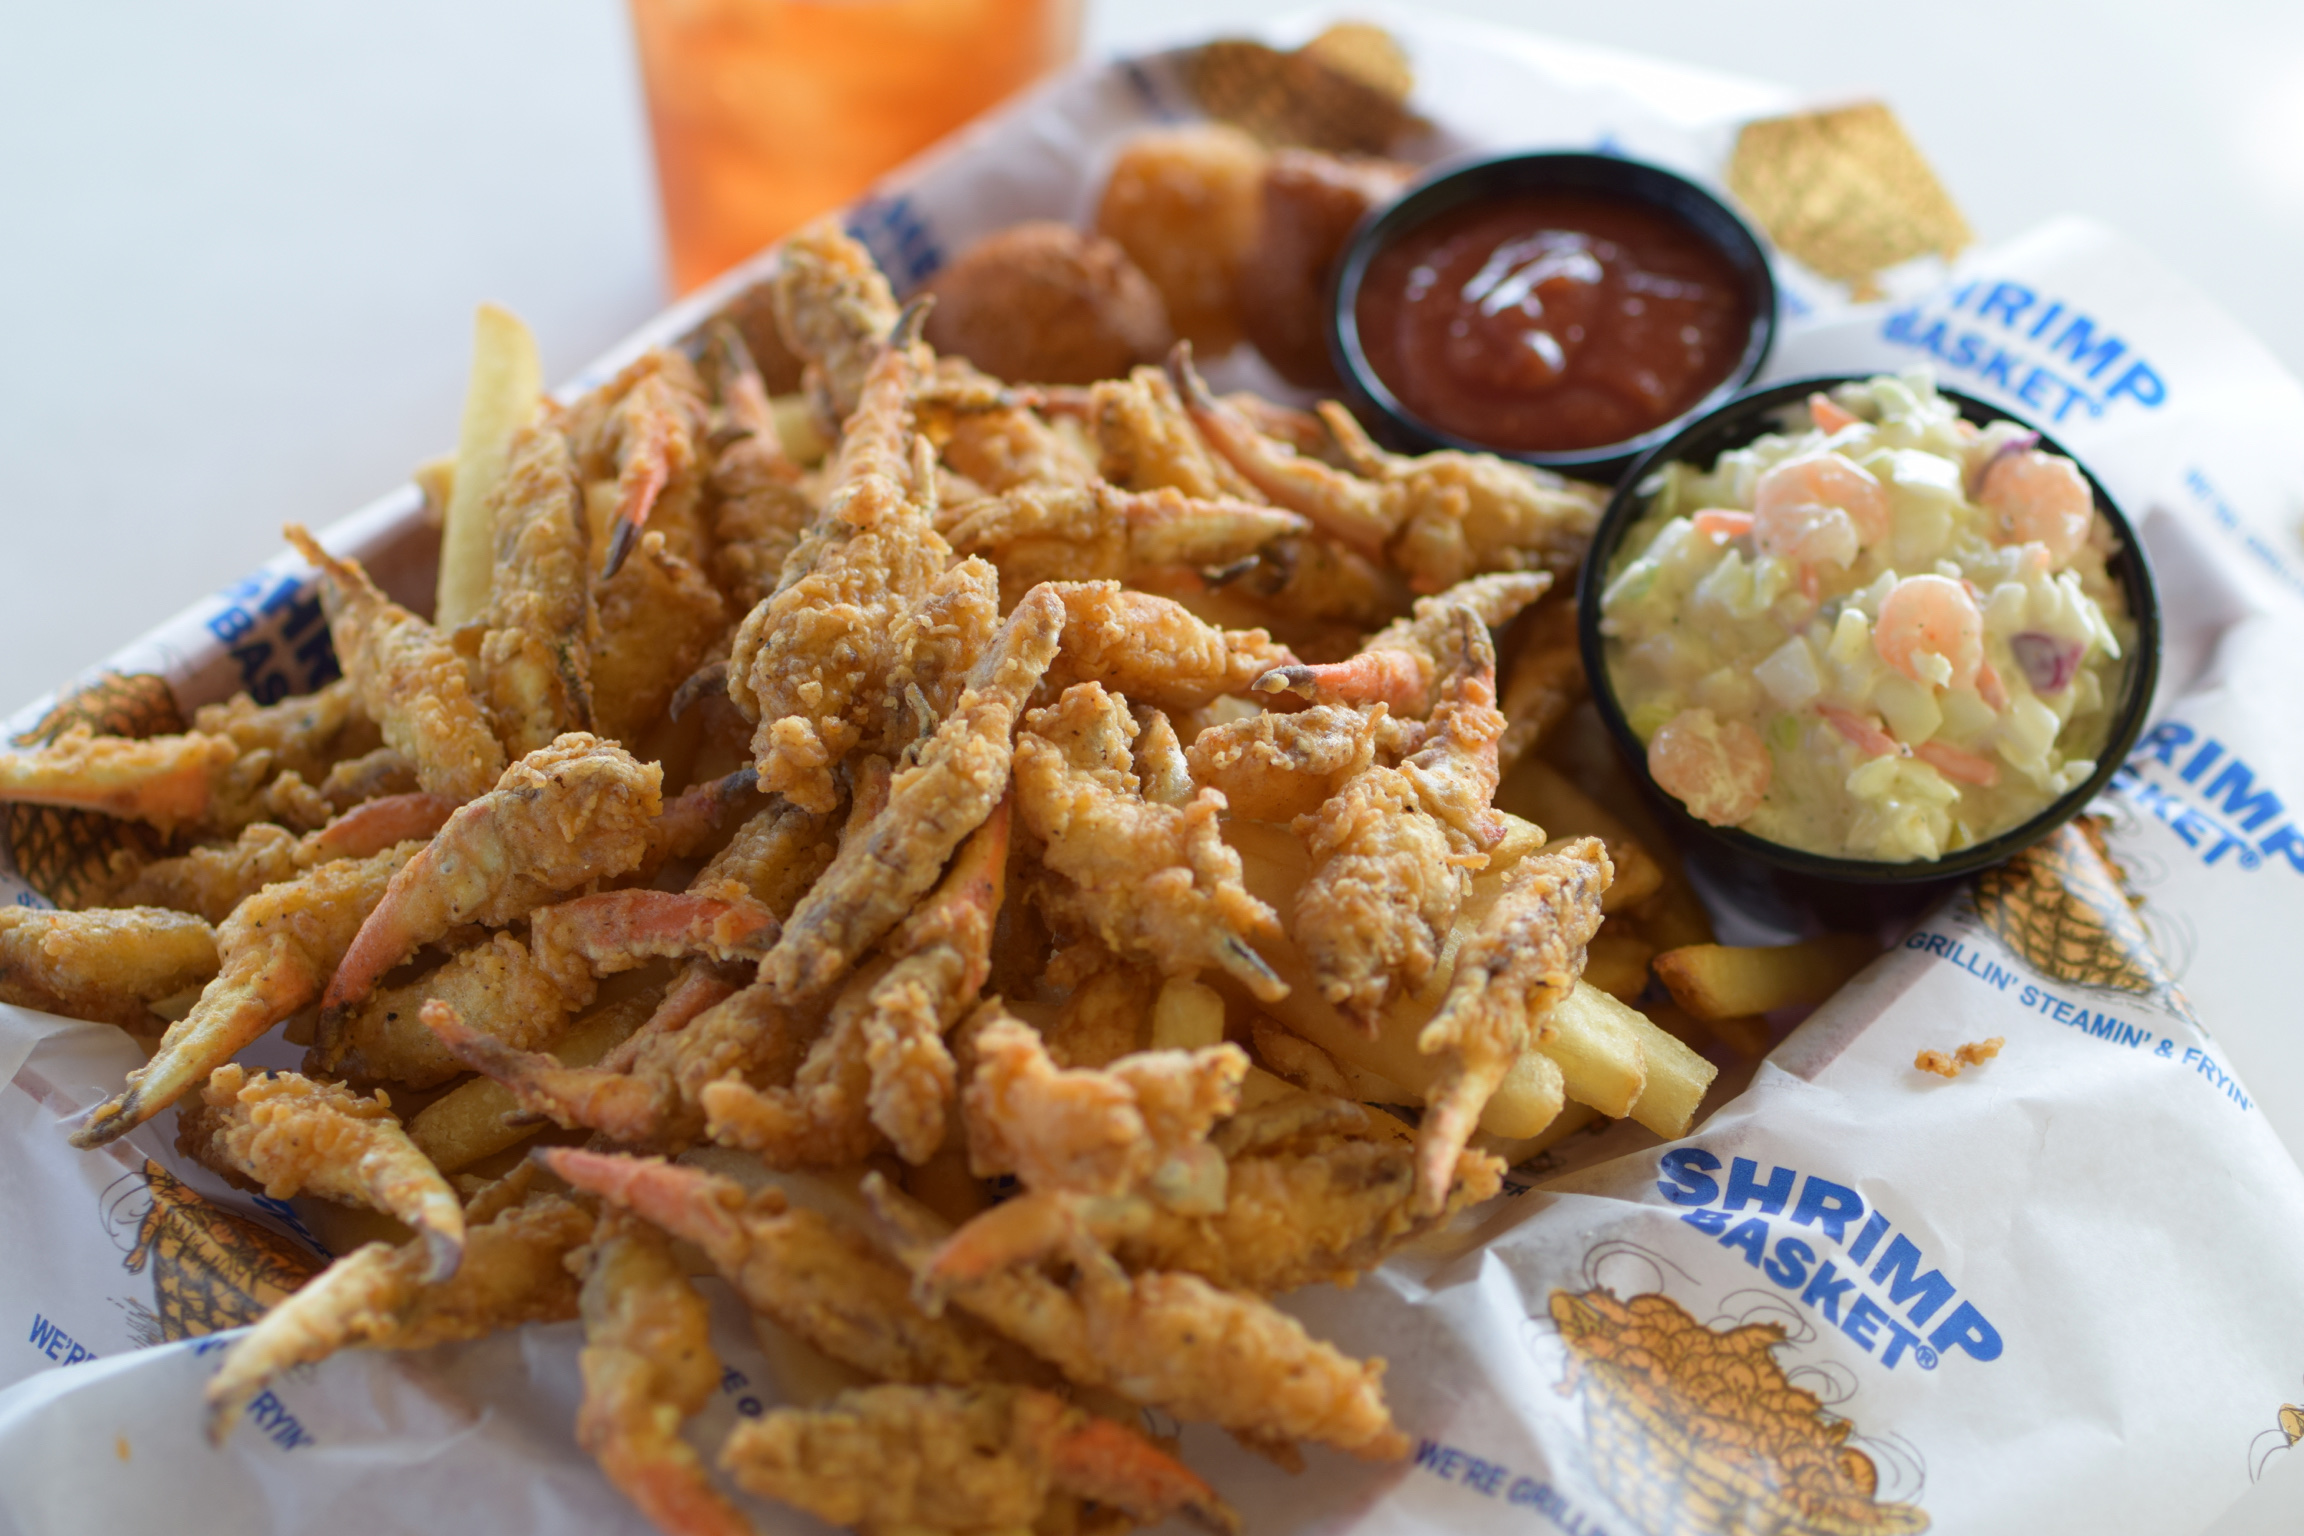 Fried crab claw basket with fries and slaw